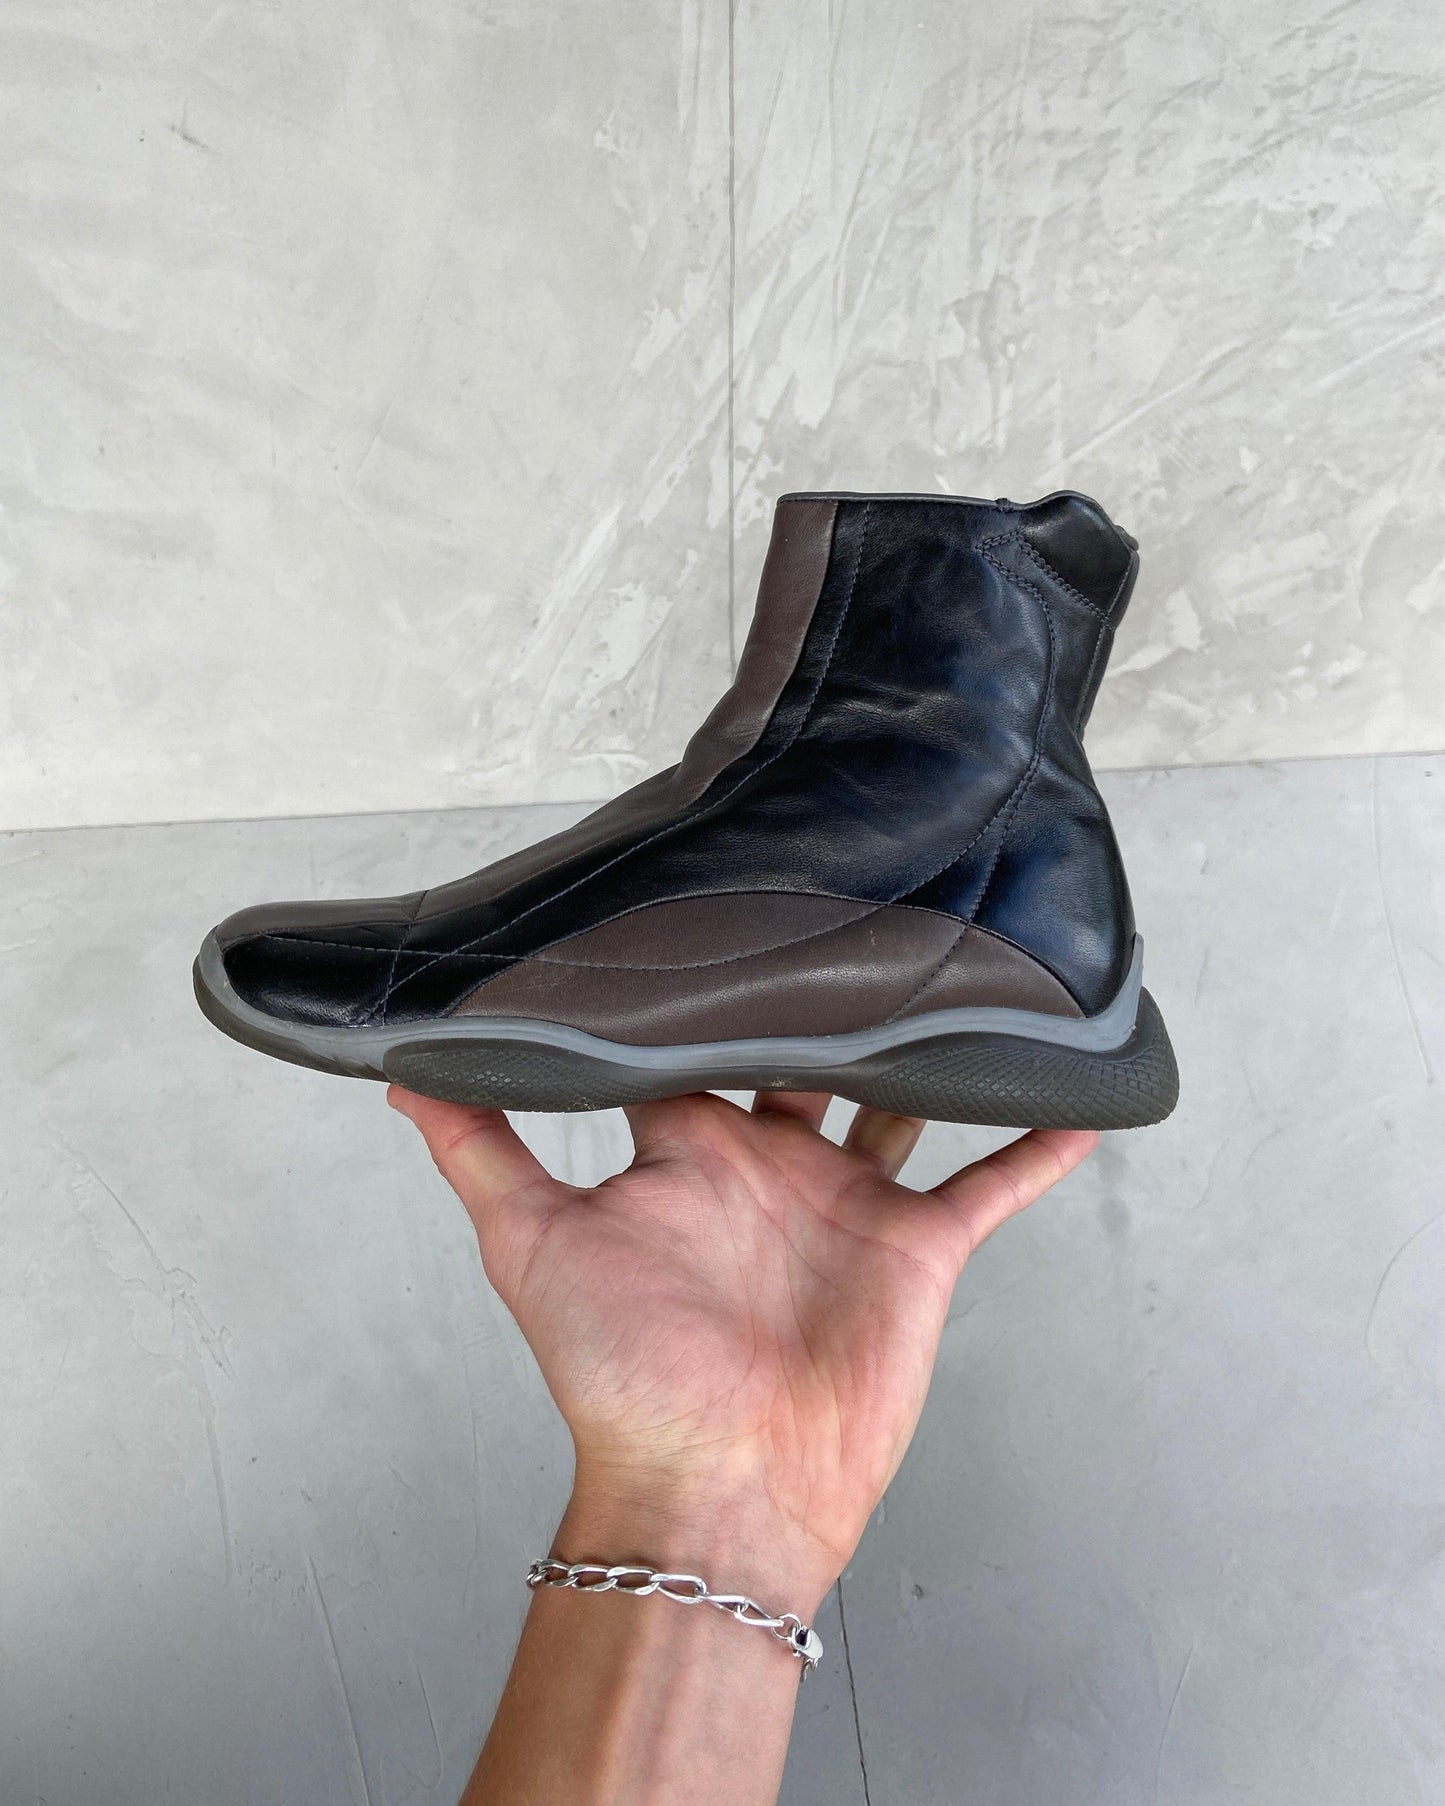 PRADA SPORT TWO-TONE LEATHER BOOTS - UK 3 - Known Source